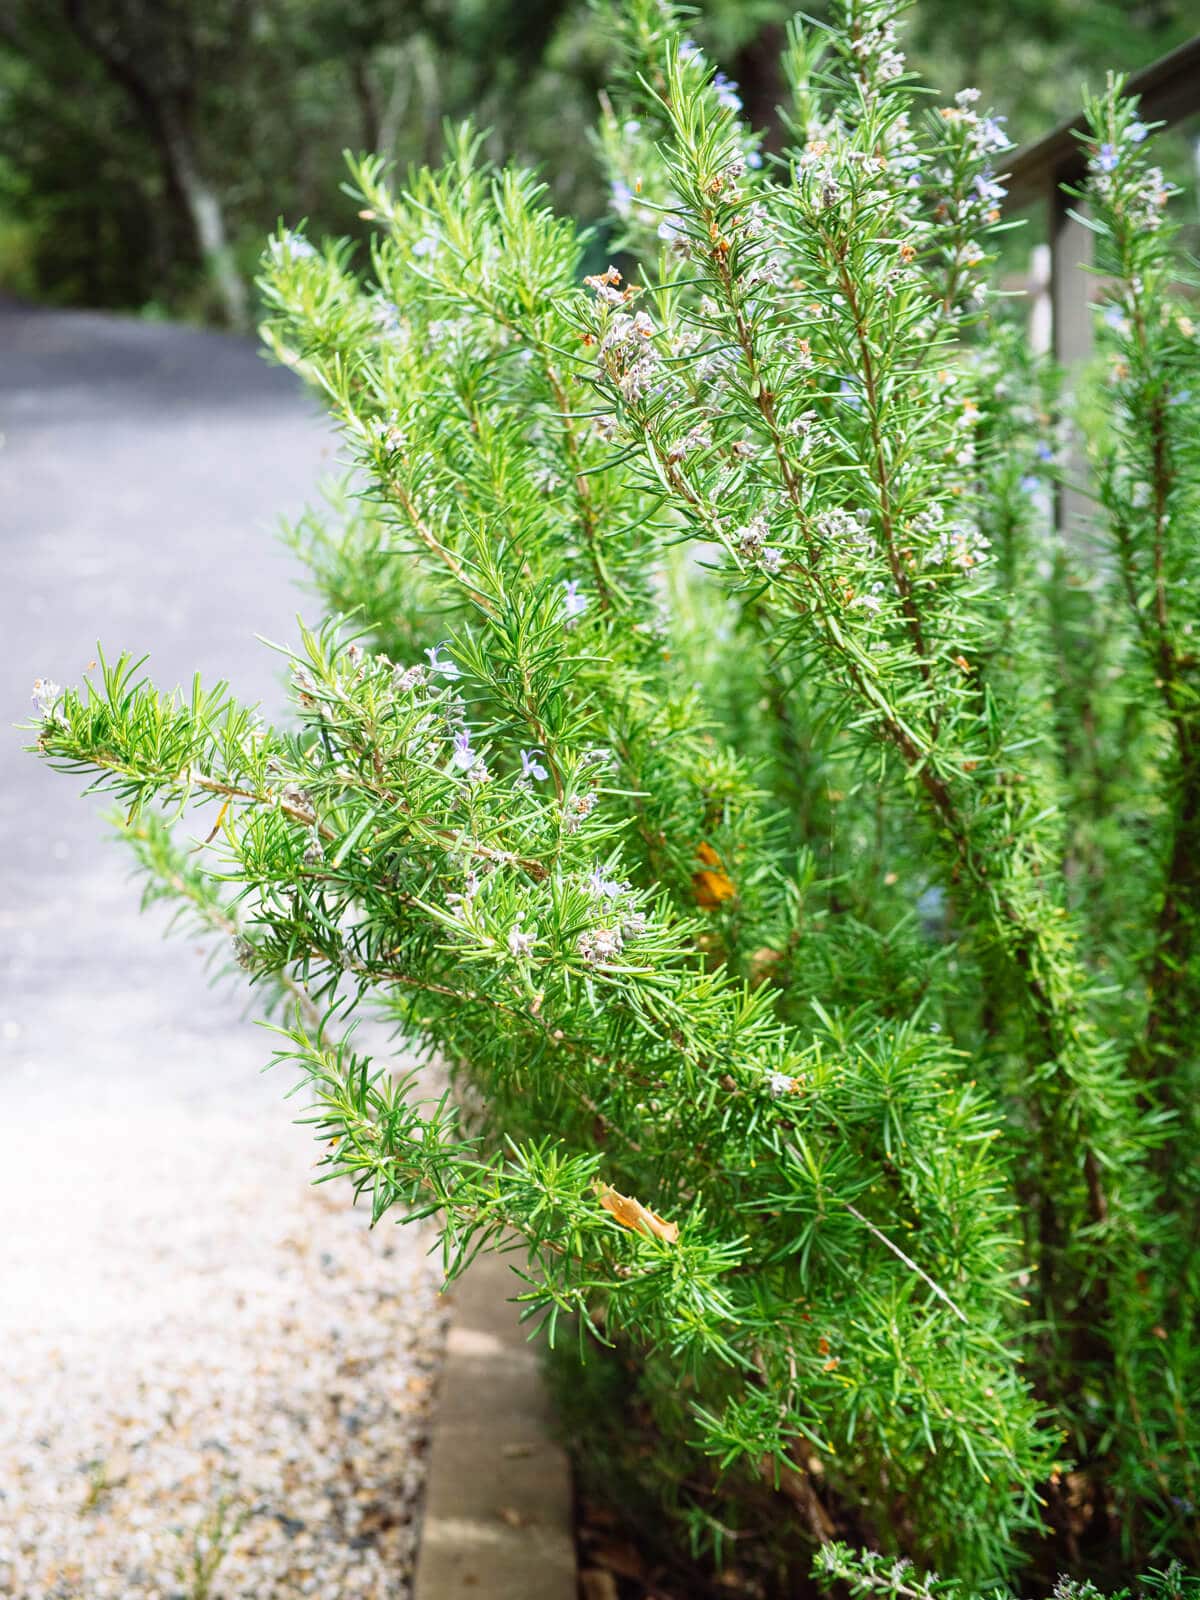 The smell of rosemary stimulates the brain and boosts working memory